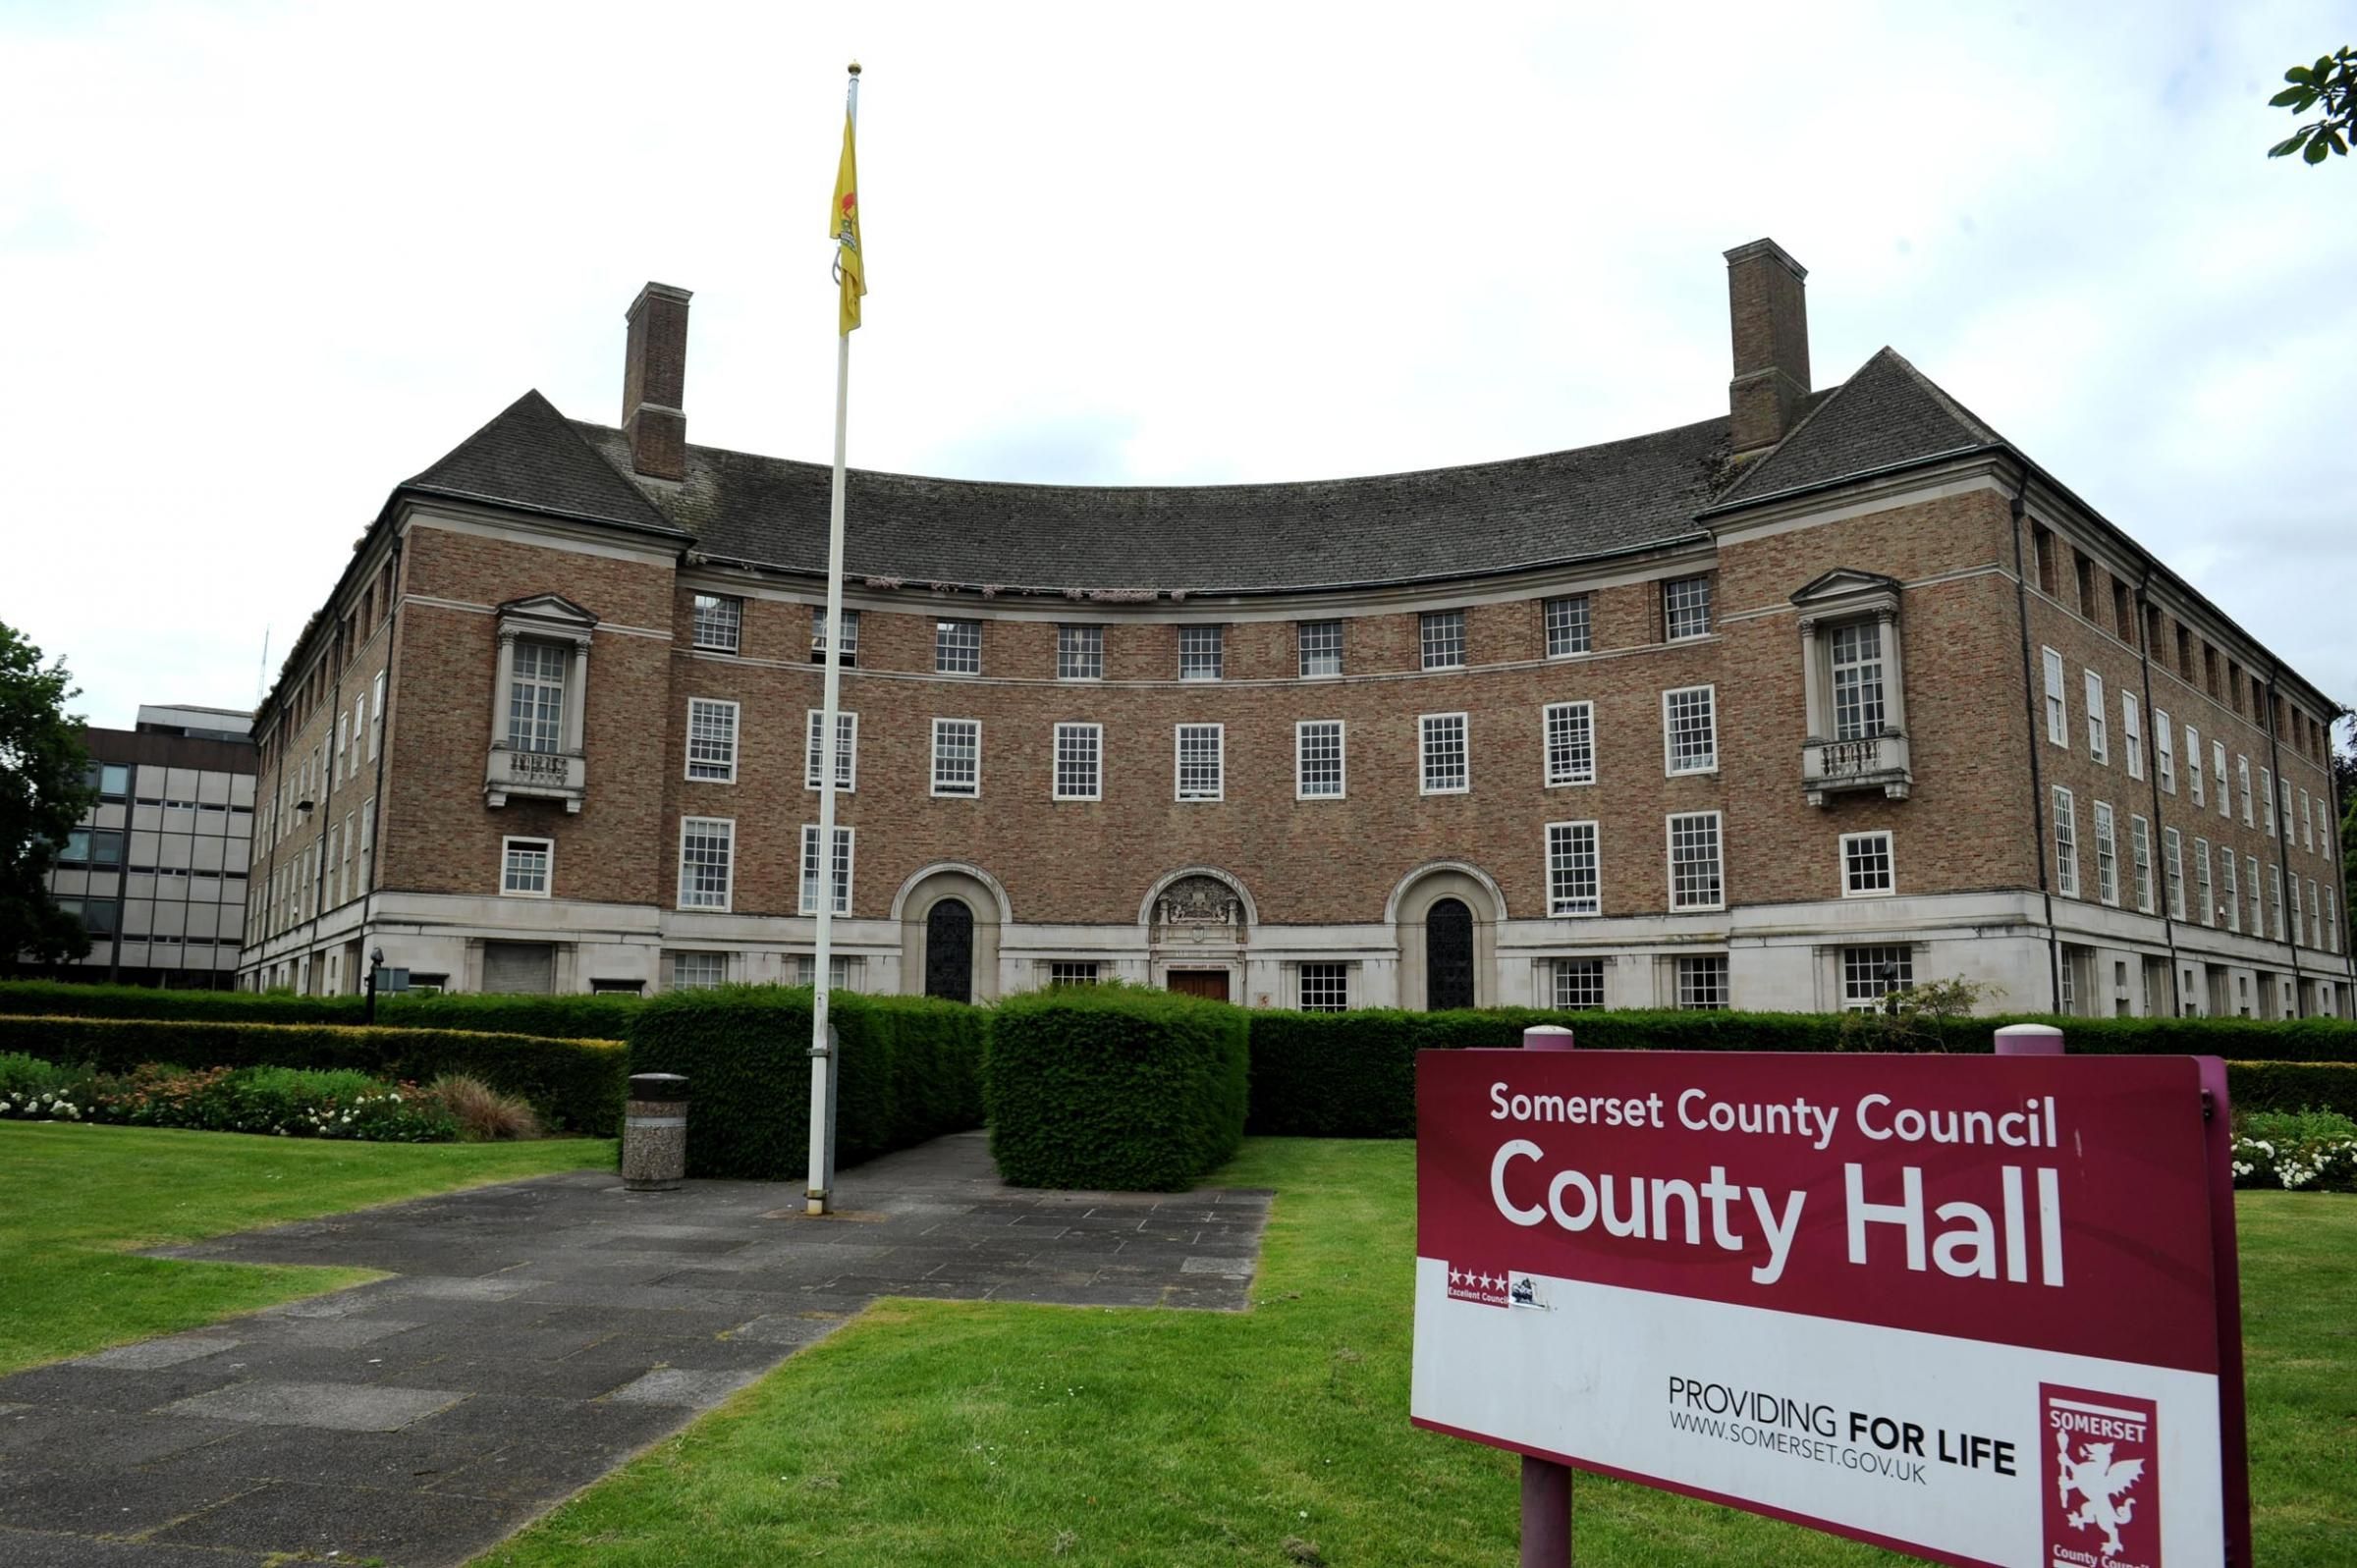 County Hall, home to Somerset County Council